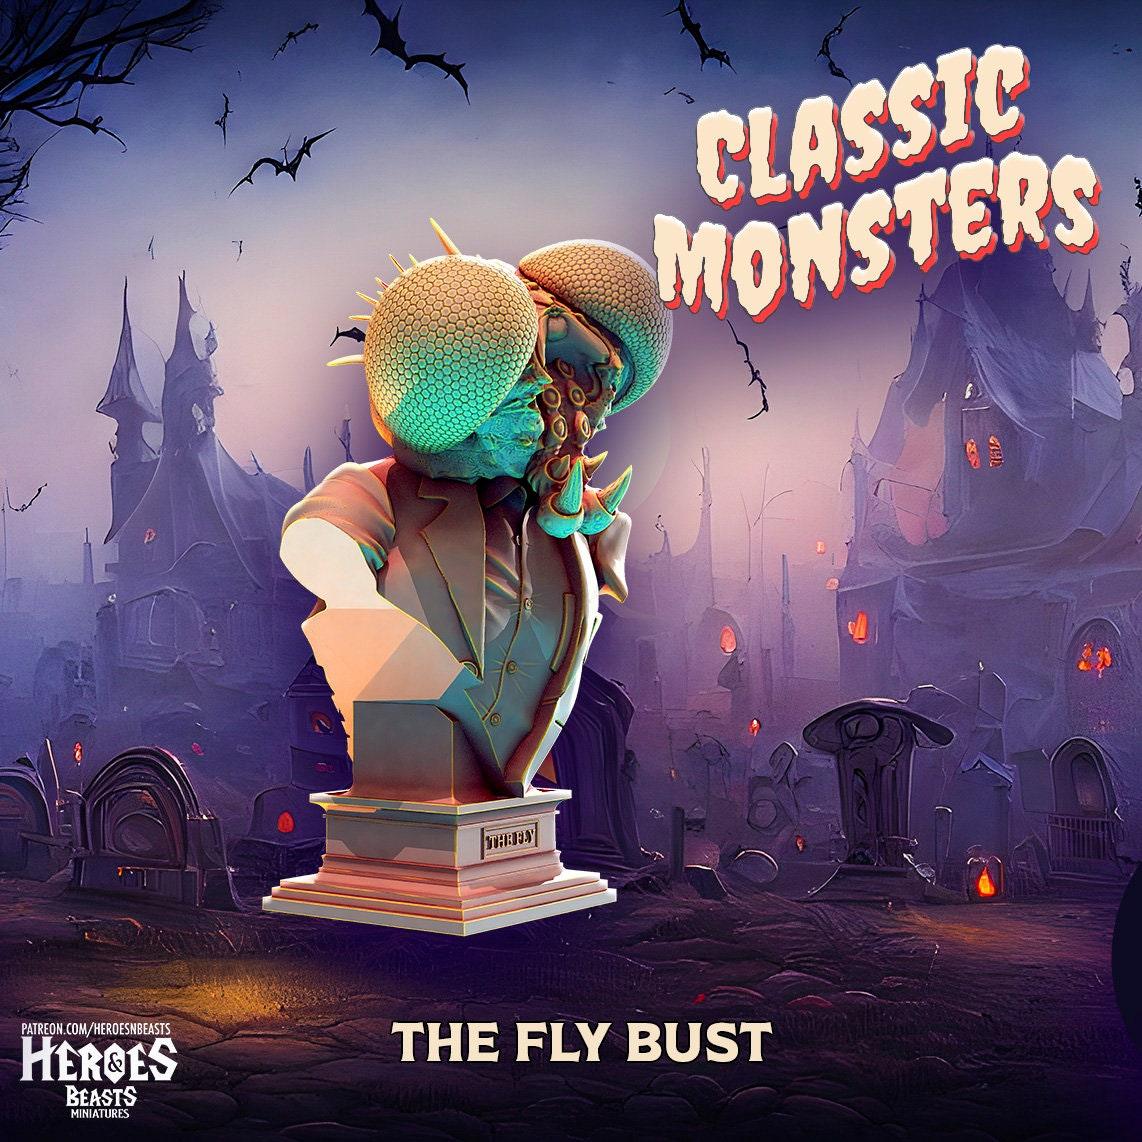 The Fly Miniature Bust Miniature Resin Display Piece | Classic Monsters | DnD Miniature | Dungeons and Dragons, DnD 5e Feature Film Theatre - Plague Miniatures shop for DnD Miniatures